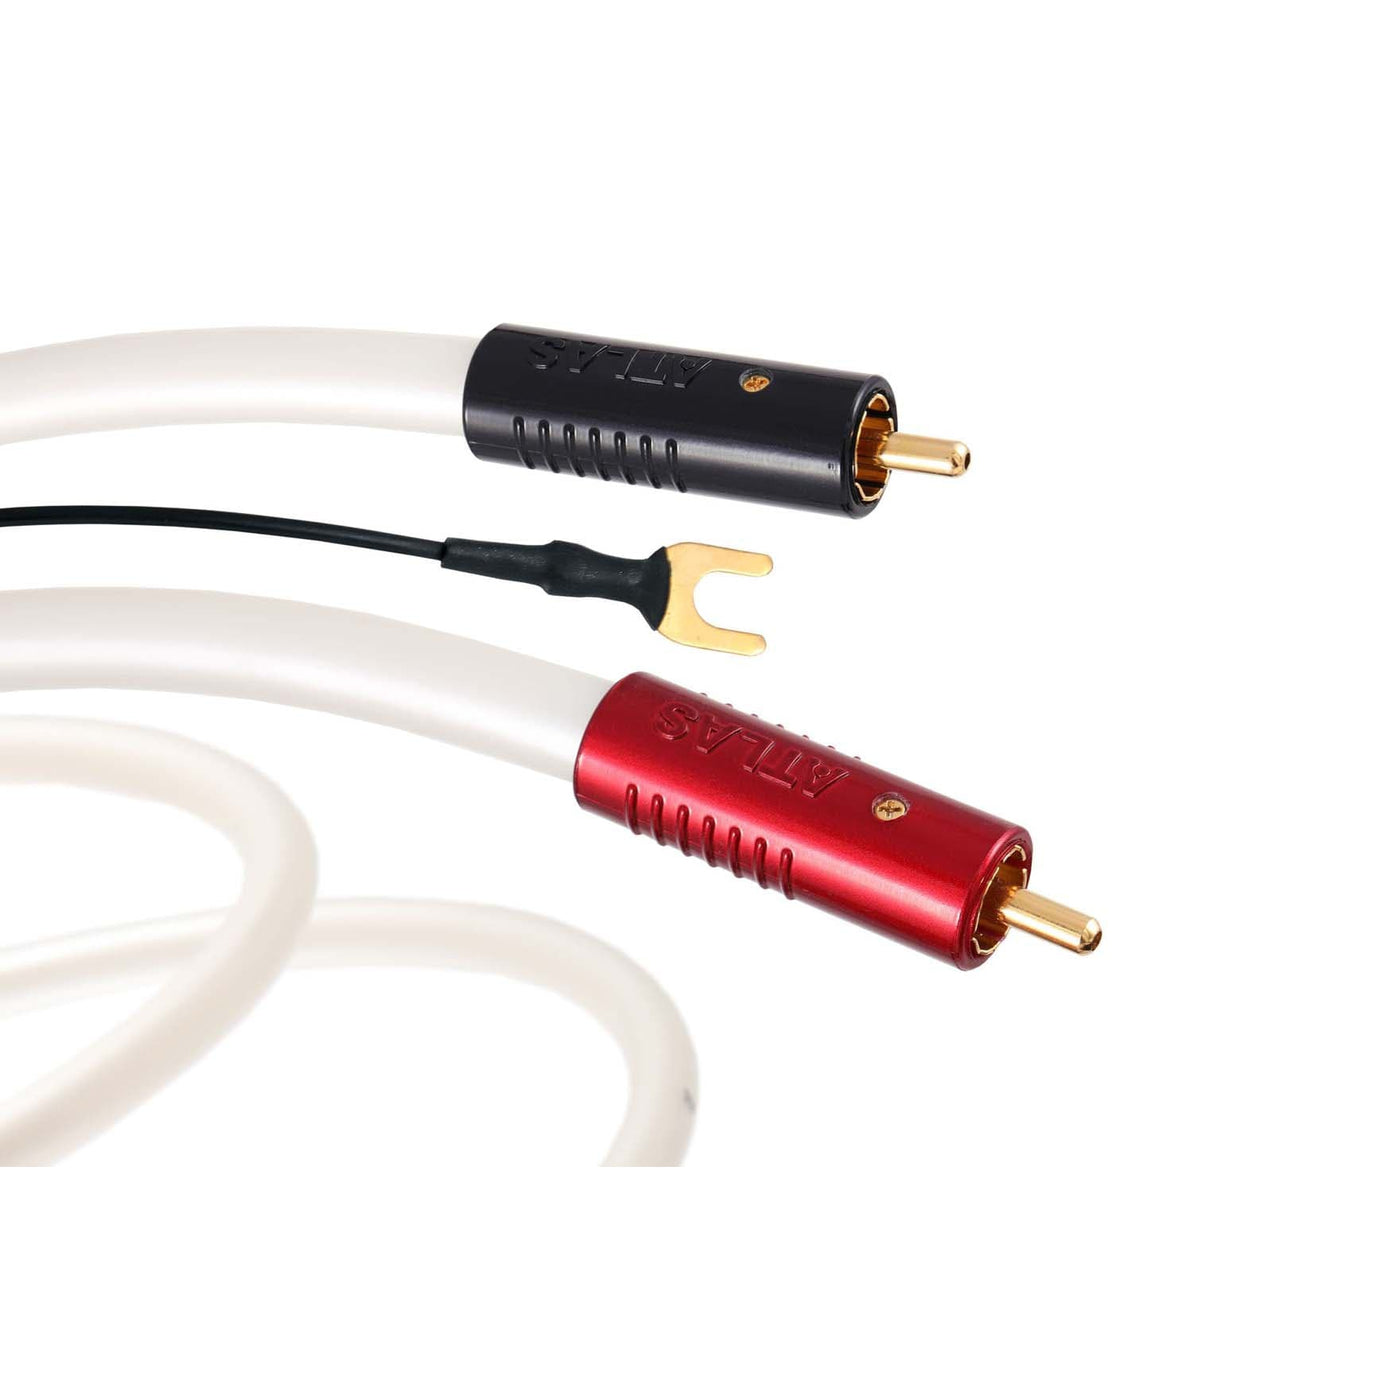 Atlas Equator Achromatic RCA Turntable Cable at Audio Influence